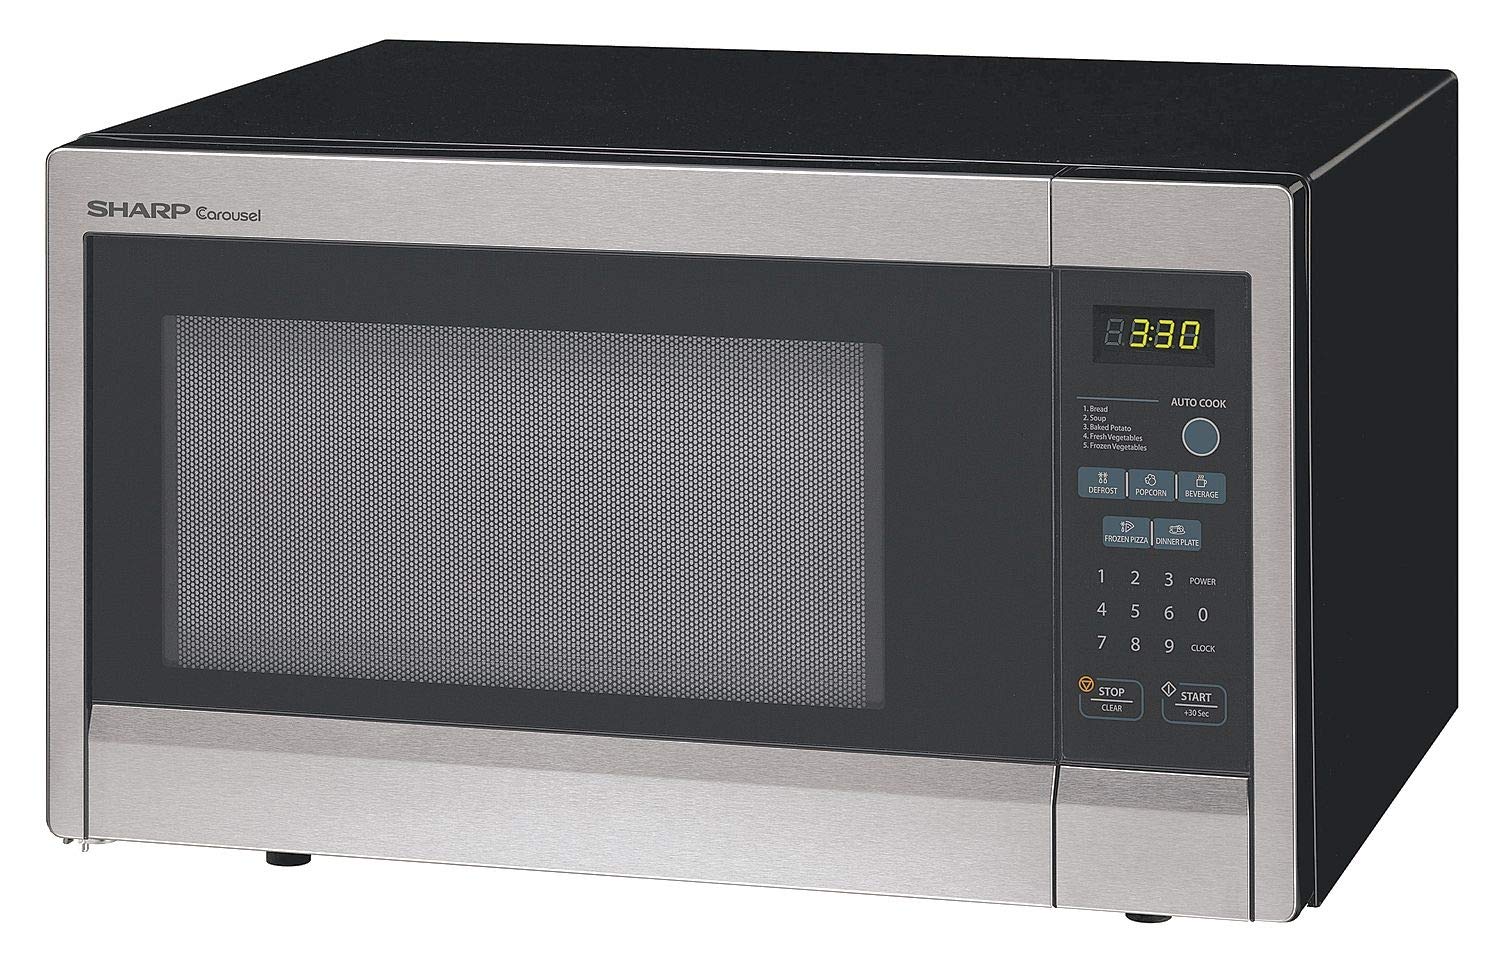 Sharp Stainless Steel Consumer Microwave Oven, 1.10 cu. ft., 120V @ 60 Hz - R331ZS